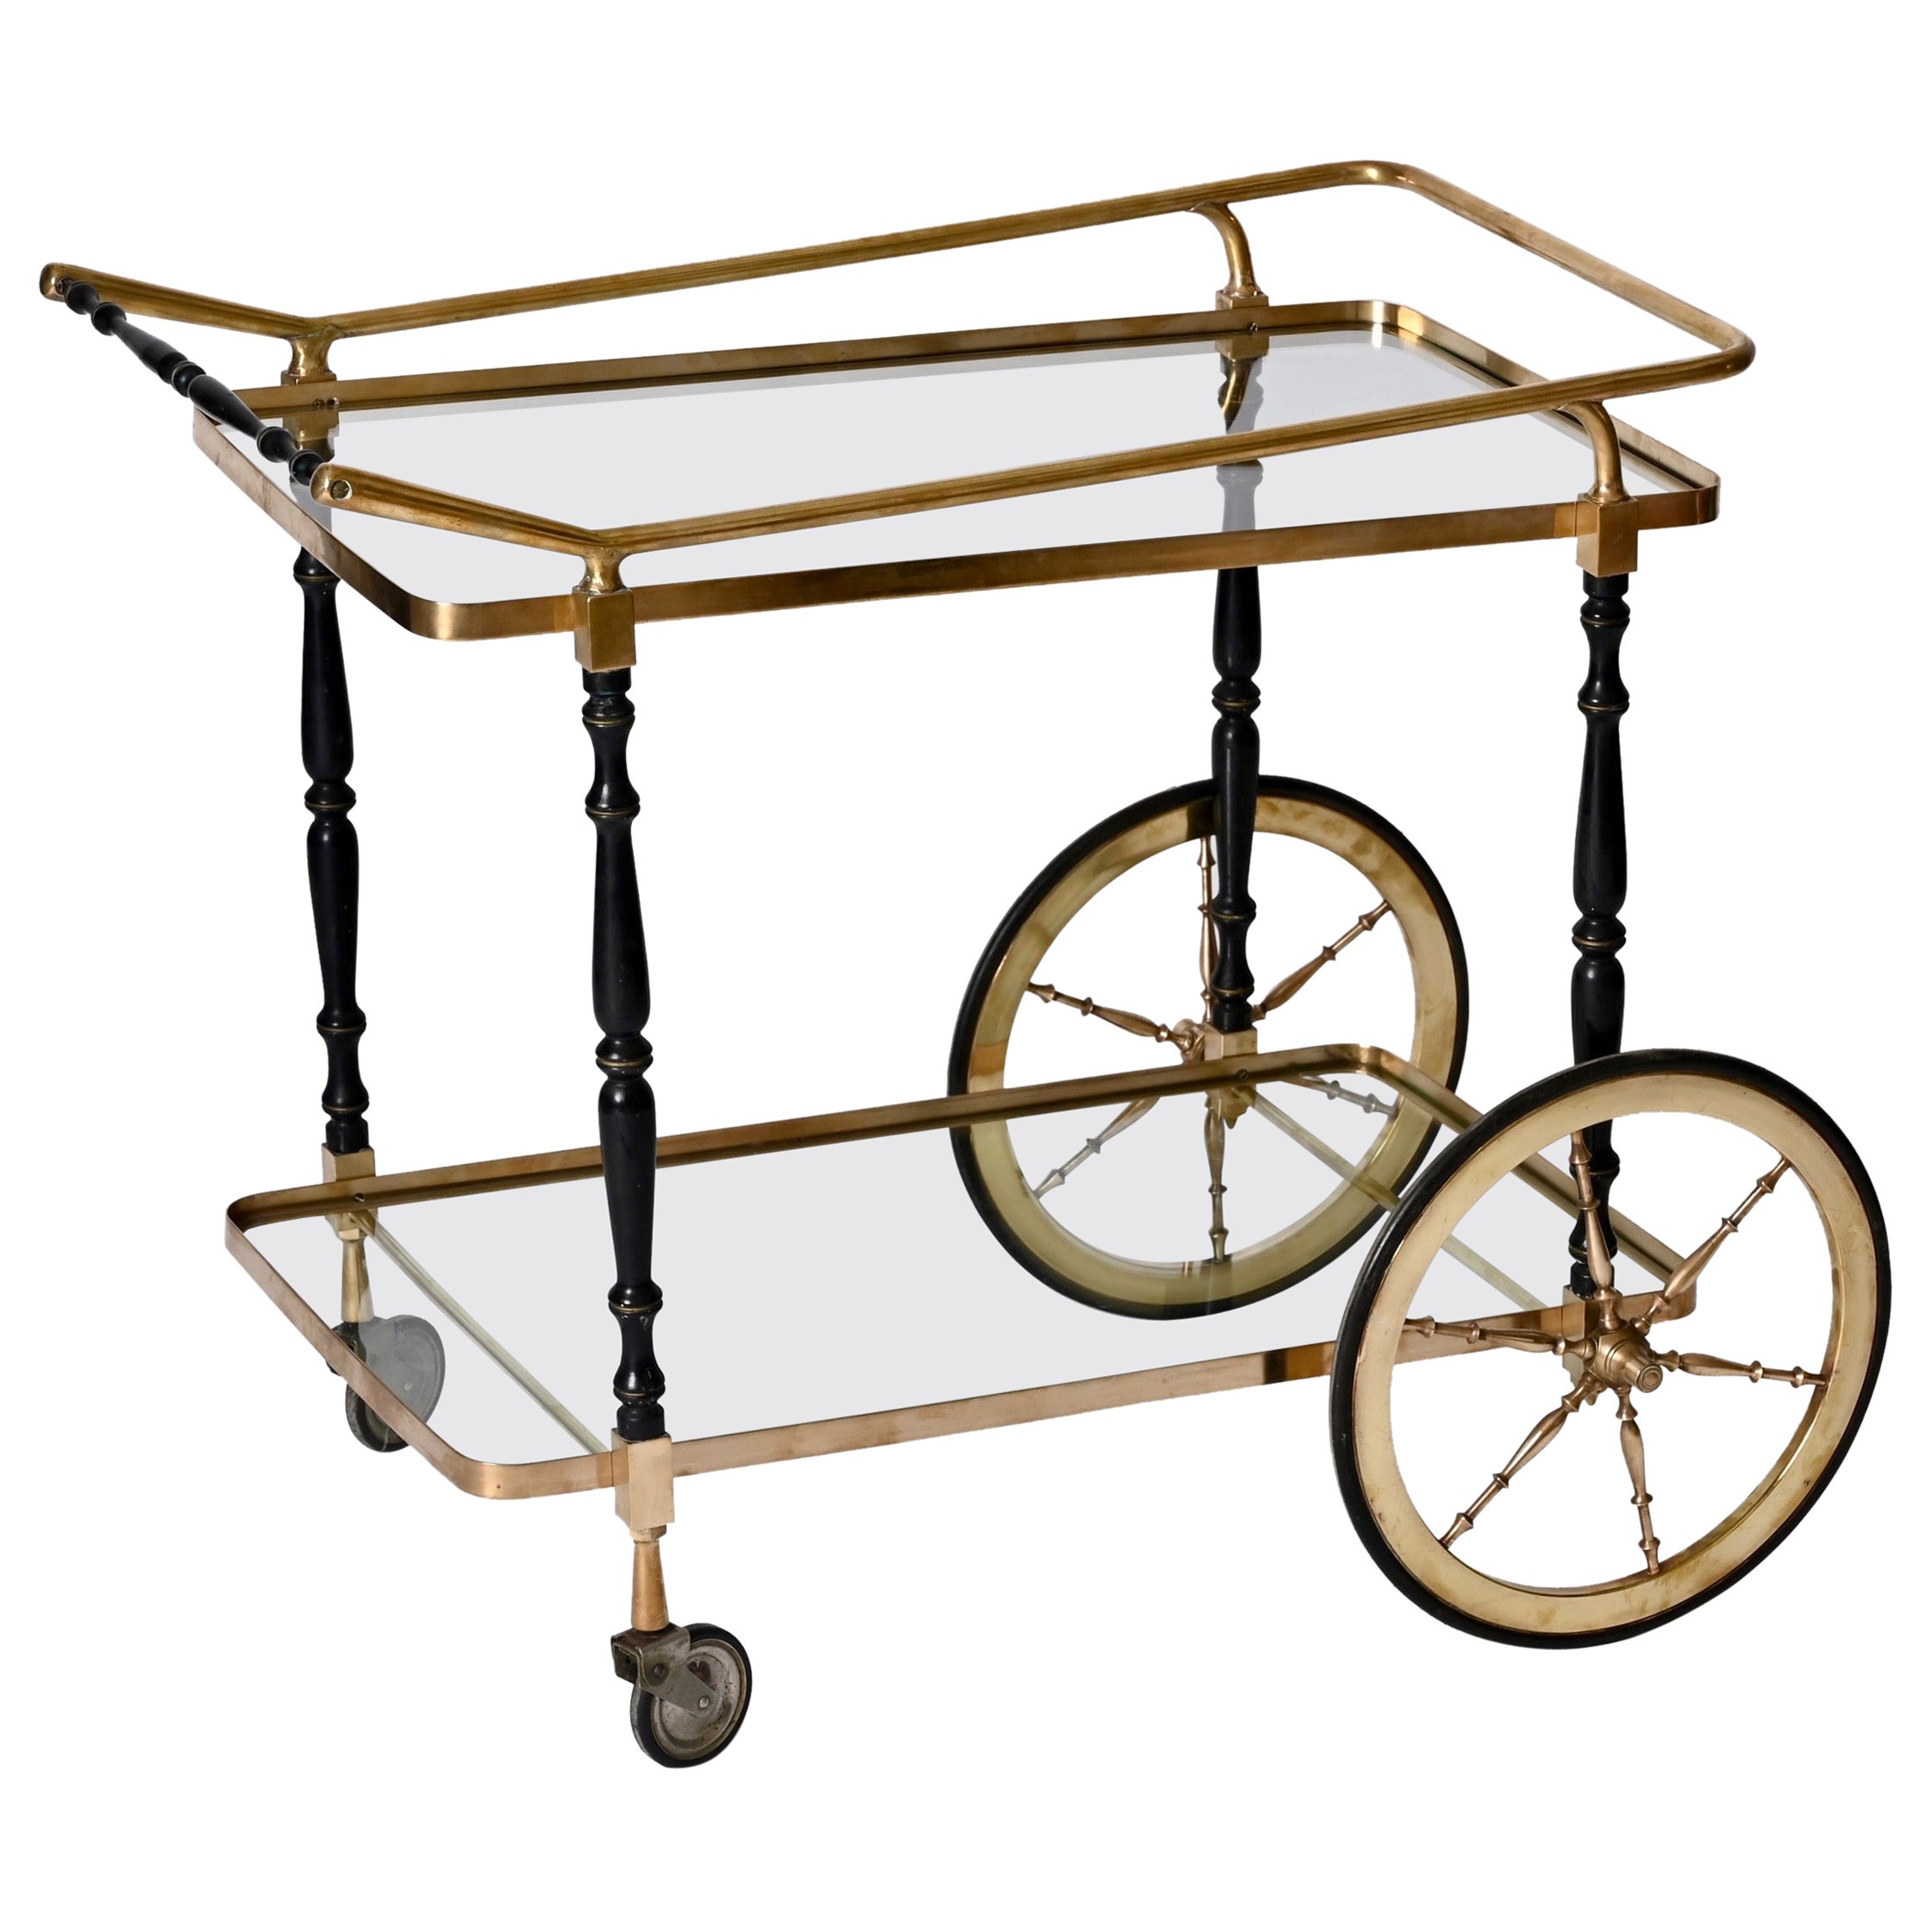 Midcentury Cesare Lacca Brass and Black Lacquer Wood Italian Bar Cart, 1950s For Sale